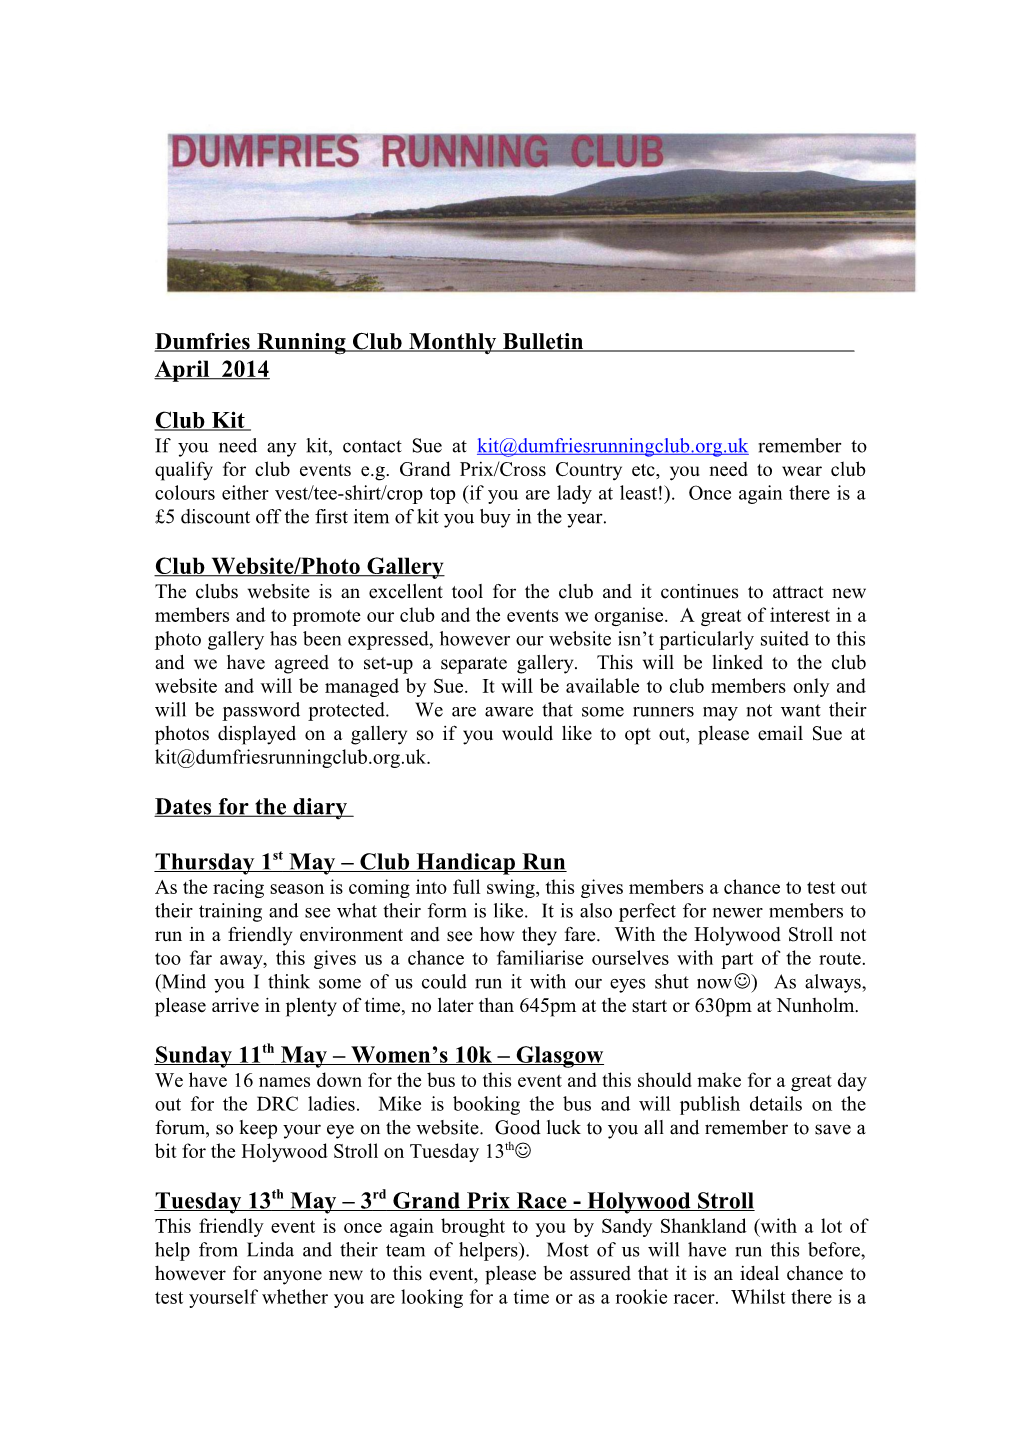 Dumfries Running Club Monthly Bulletin April 2014